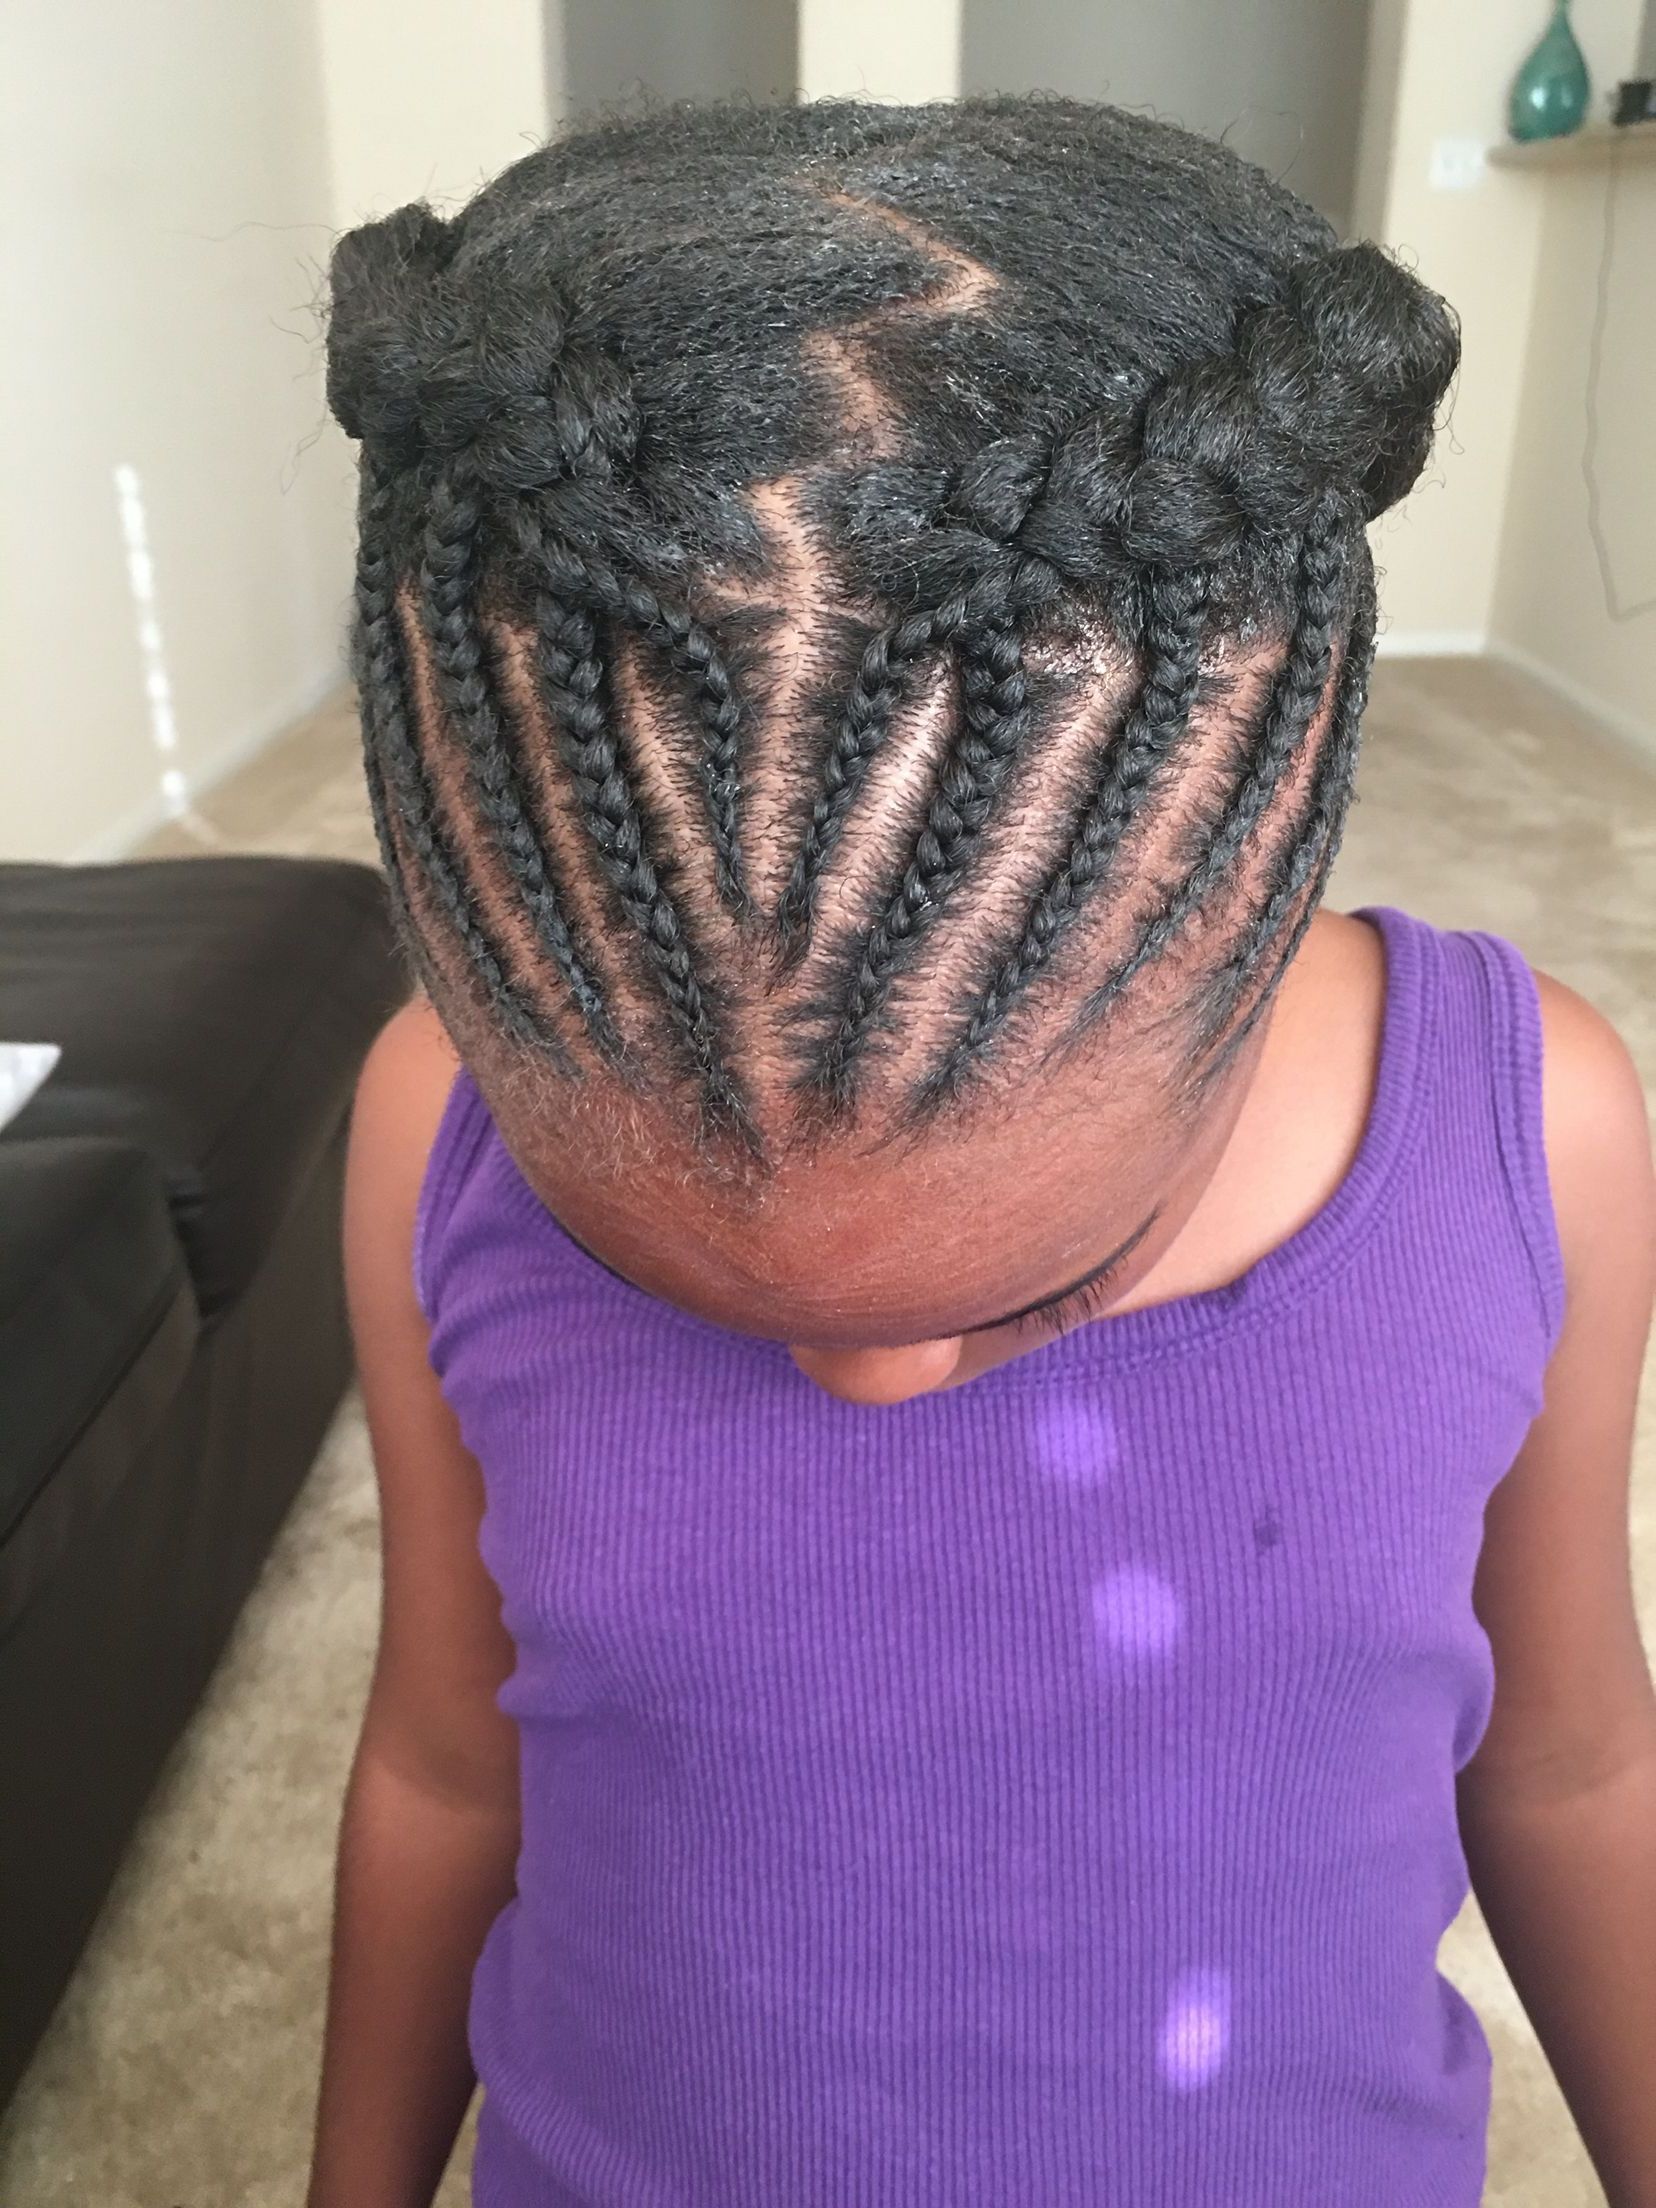 Most Recent No Pin Halo Braided Hairstyles Within Goddess Braids, Half Braided, Halo, Beehive, Black Girl Hair (Gallery 20 of 20)